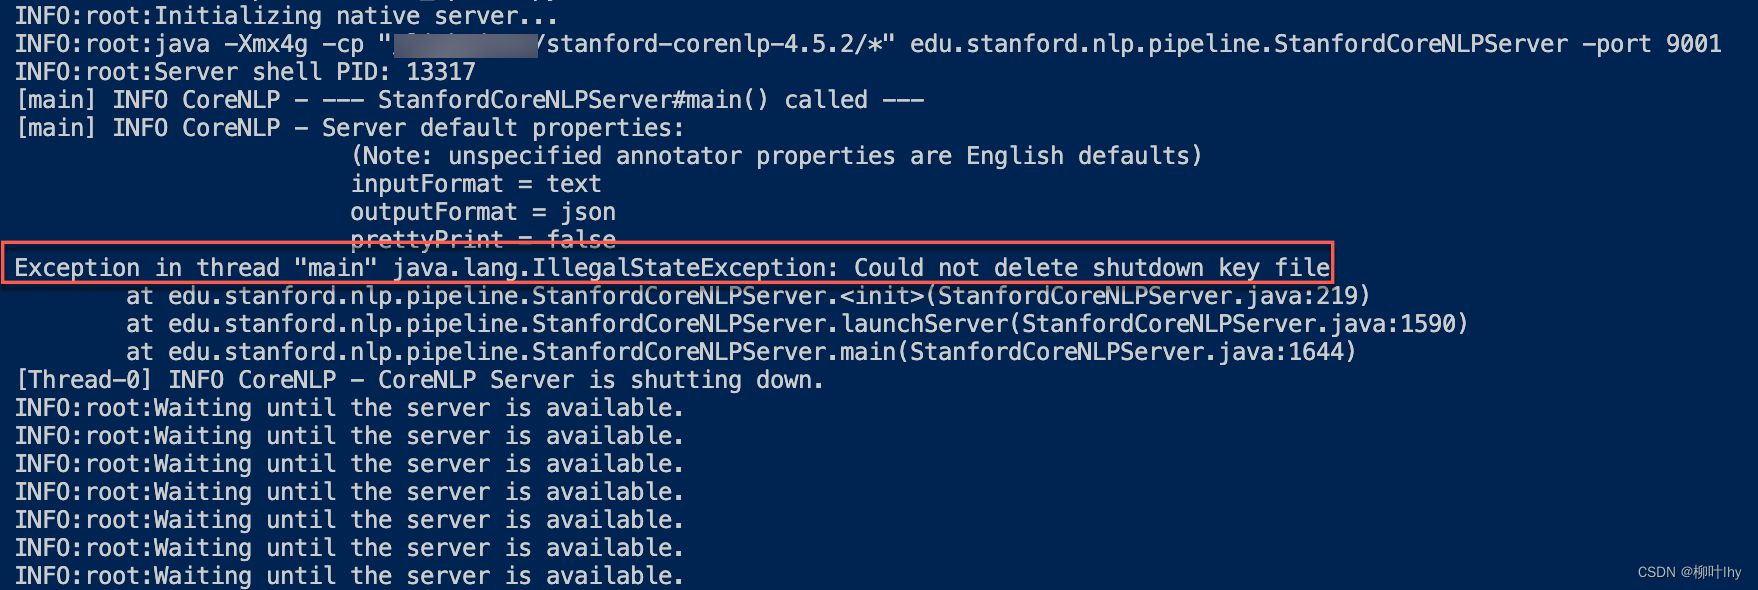 【Solved】java.lang.IllegalStateException: Could not delete shutdown key file